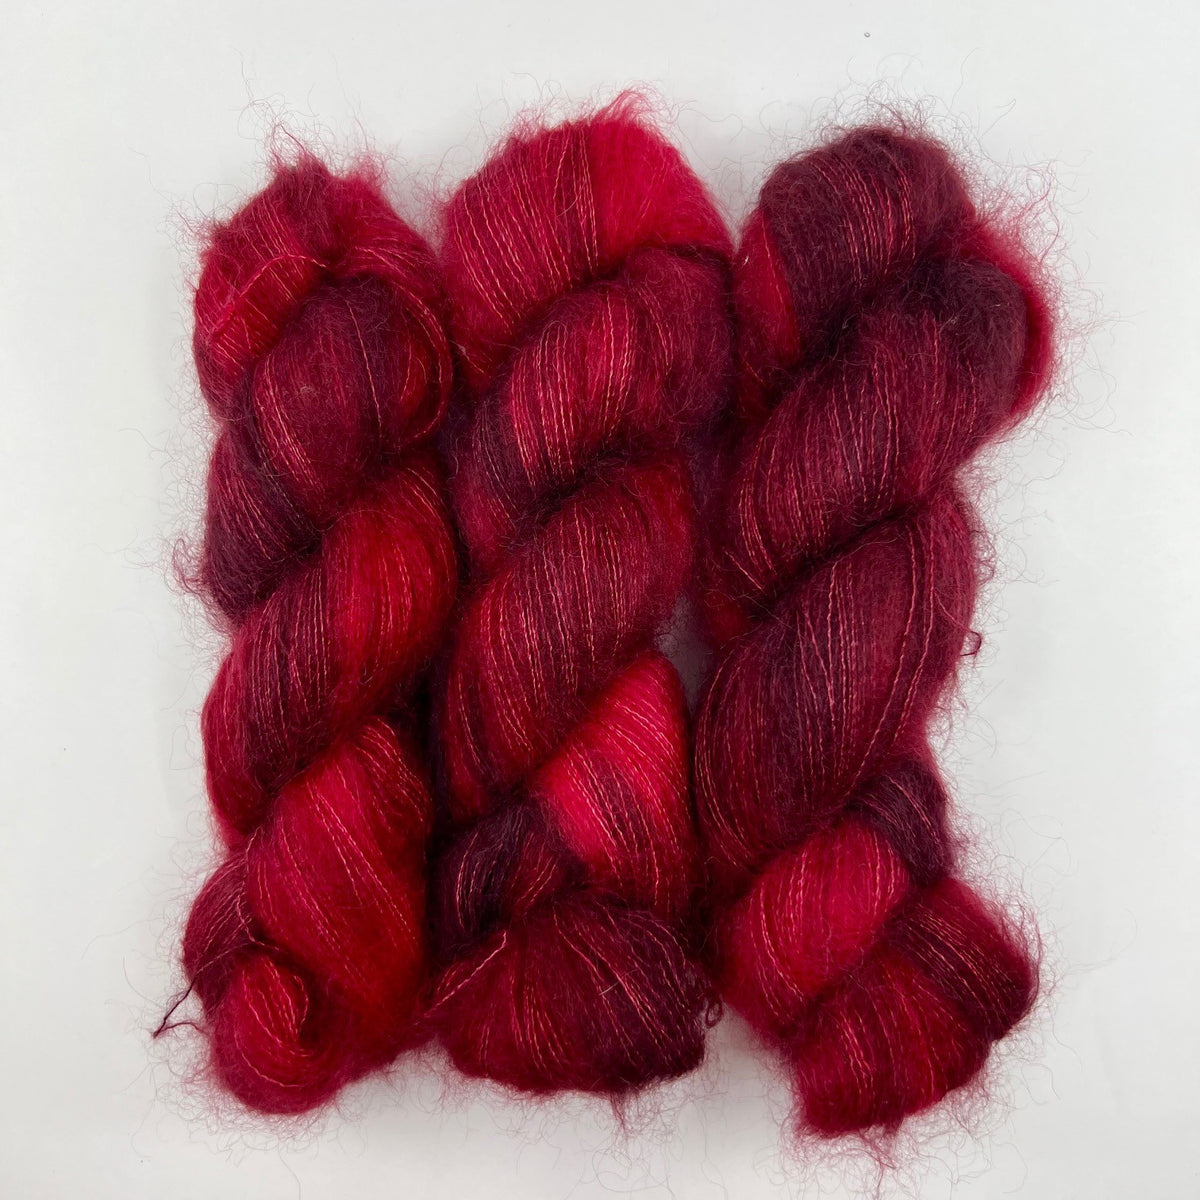 Syrah by Moonlight - Delicacy Lace - Dyed Stock